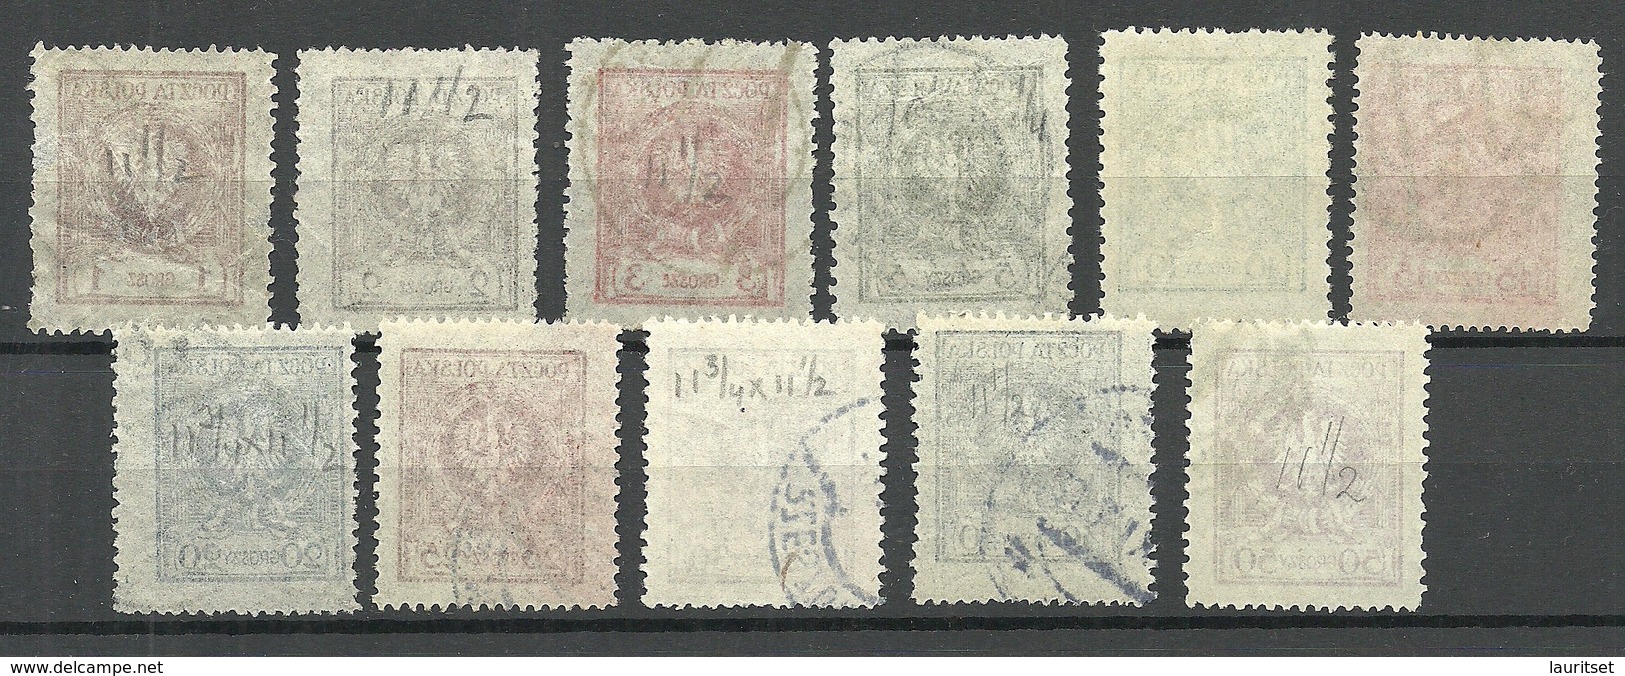 POLEN Poland 1924 Michel 201 - 211 O Various Perforations - Used Stamps